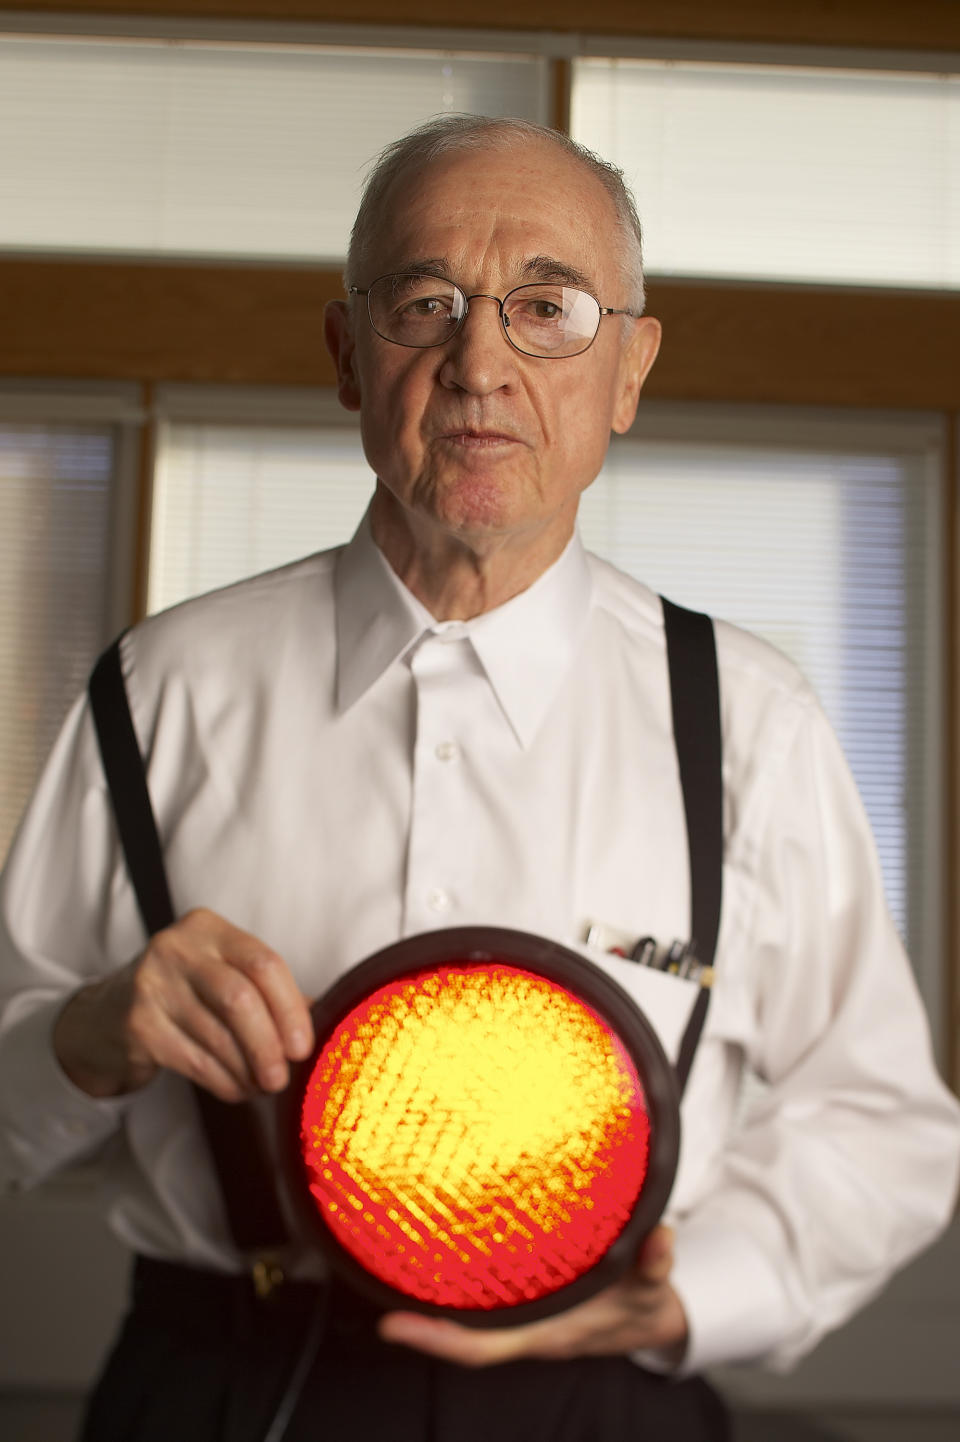 University of Illinois Professor Nick Holonyak, Jr., inventor of the light-emitting diode, holds a part of a stoplight that utilizes brighter, current version LED's designed by students of his. (Photo by Ralf-Finn Hestoft/Corbis via Getty Images)